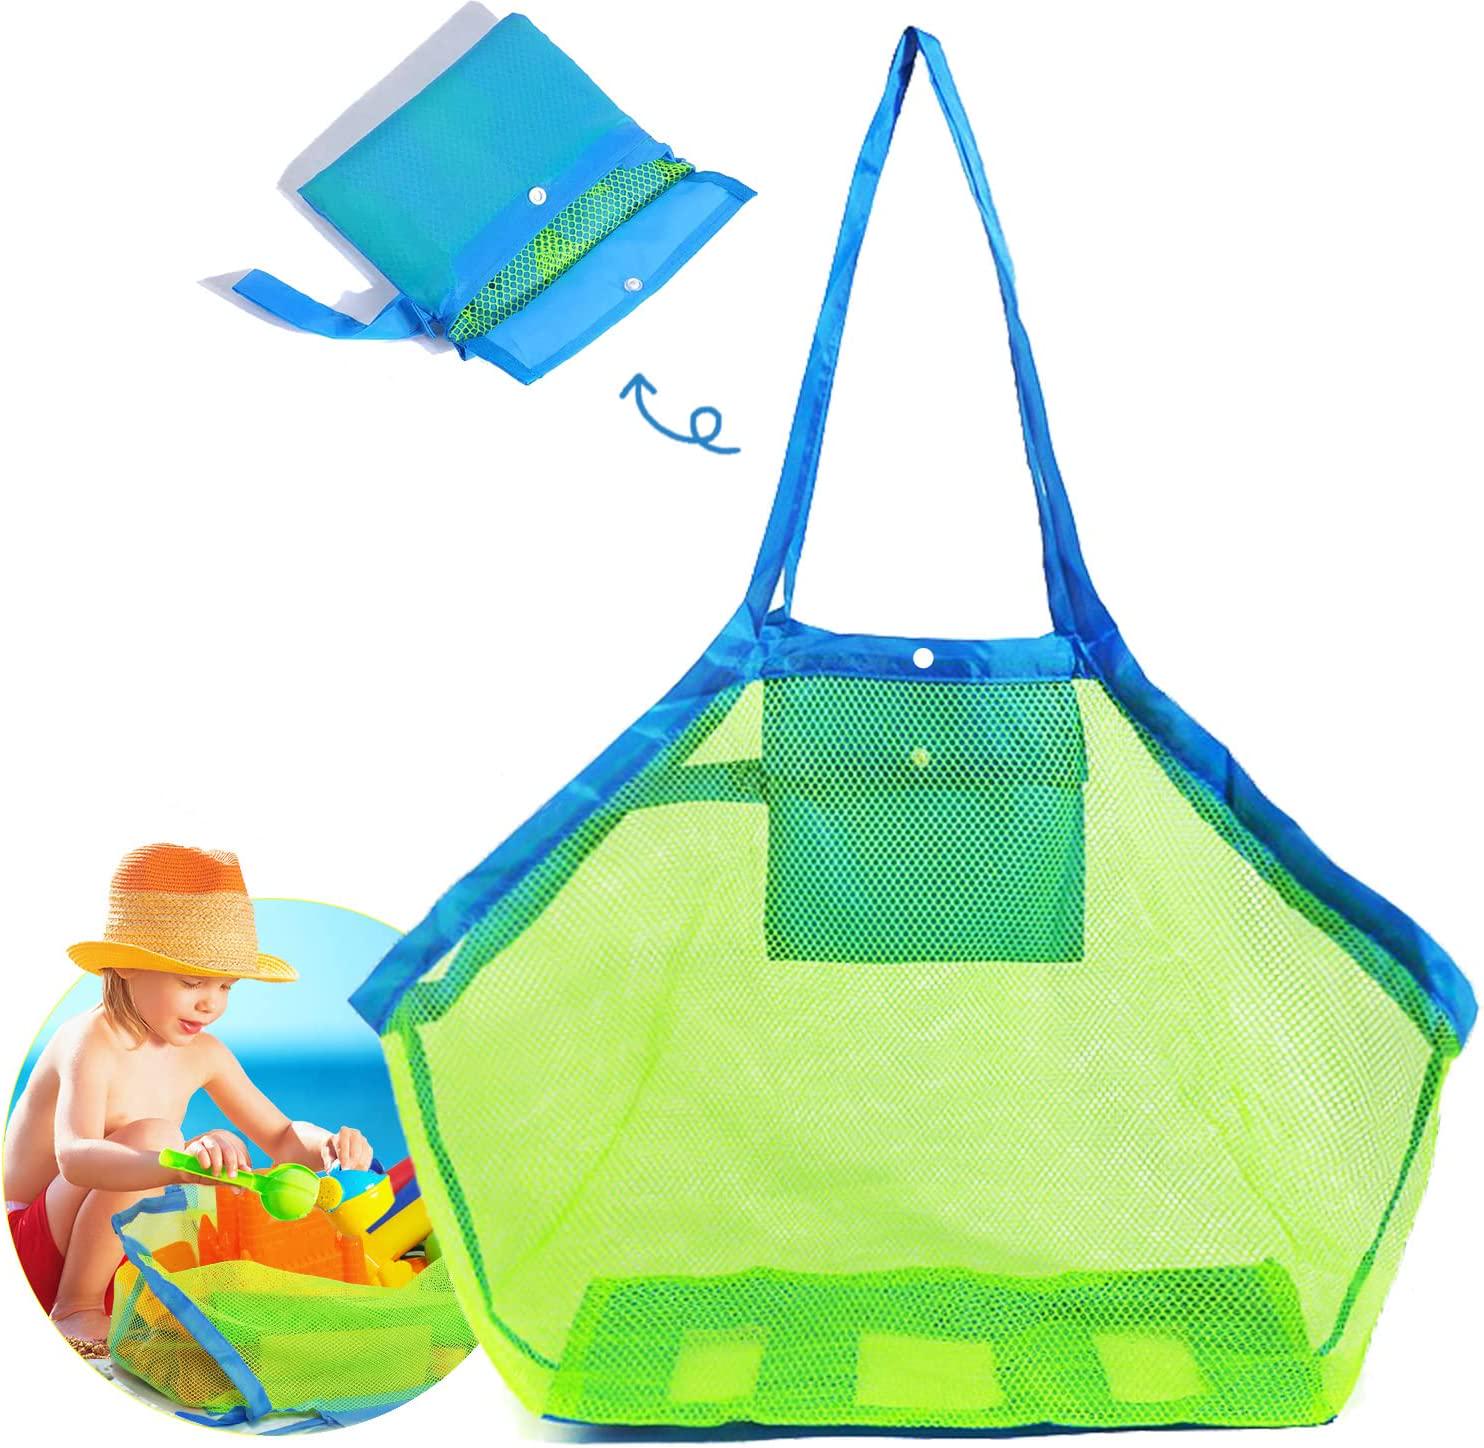 jxcmhg, Mesh Beach Bag Extra Large Beach Bags and Totes,Shell Bag Tote,Backpack Toys,Towels Sand Away for Holding Beach Toys Children Toys Market Grocery Picnic Tote